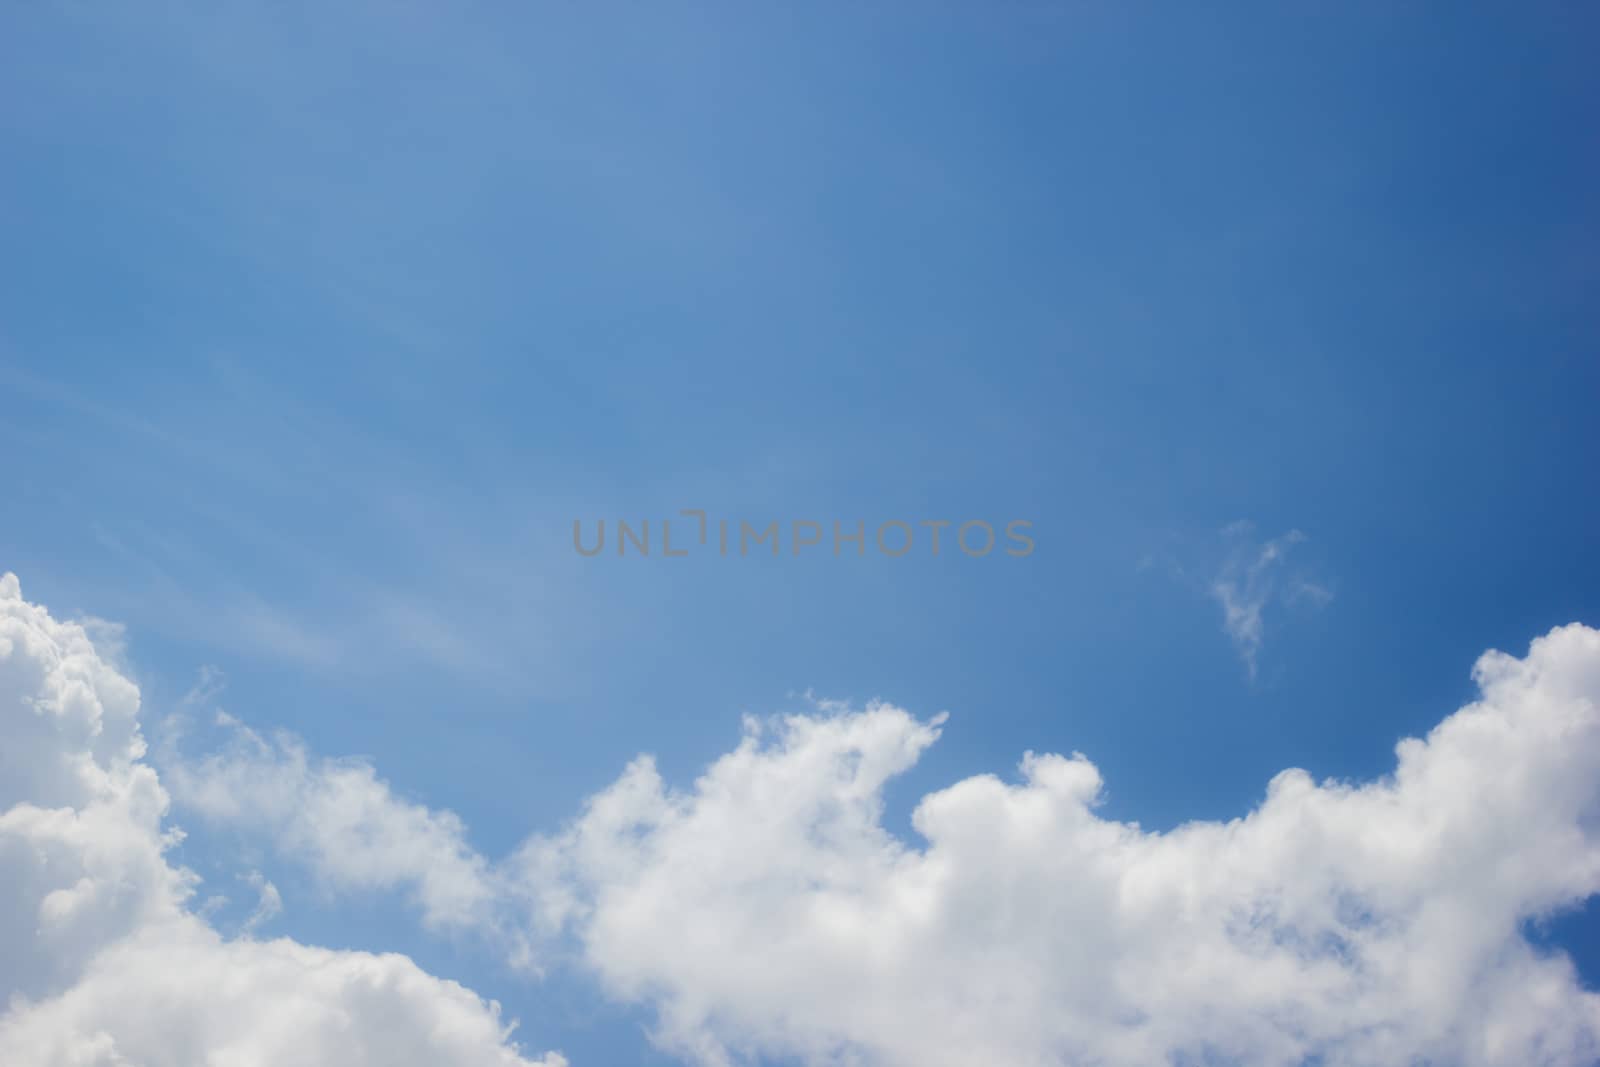 horizontal photo of clouds in blue sky with copyspace in the middle